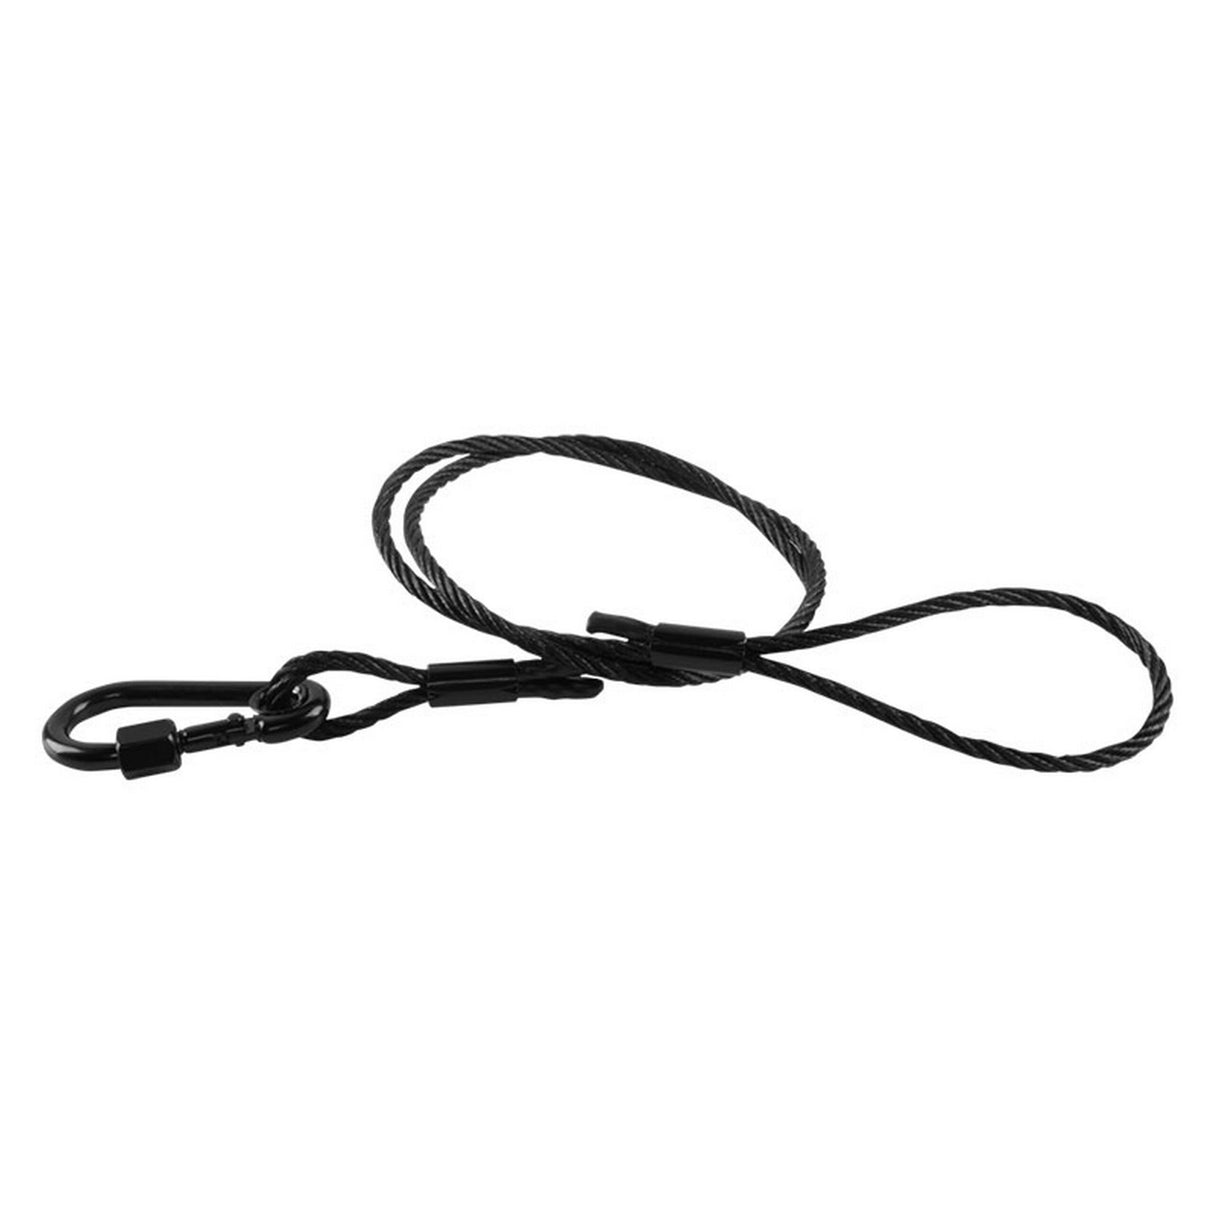 Chauvet Professional SC-07 Safety Cable, 35 Inches